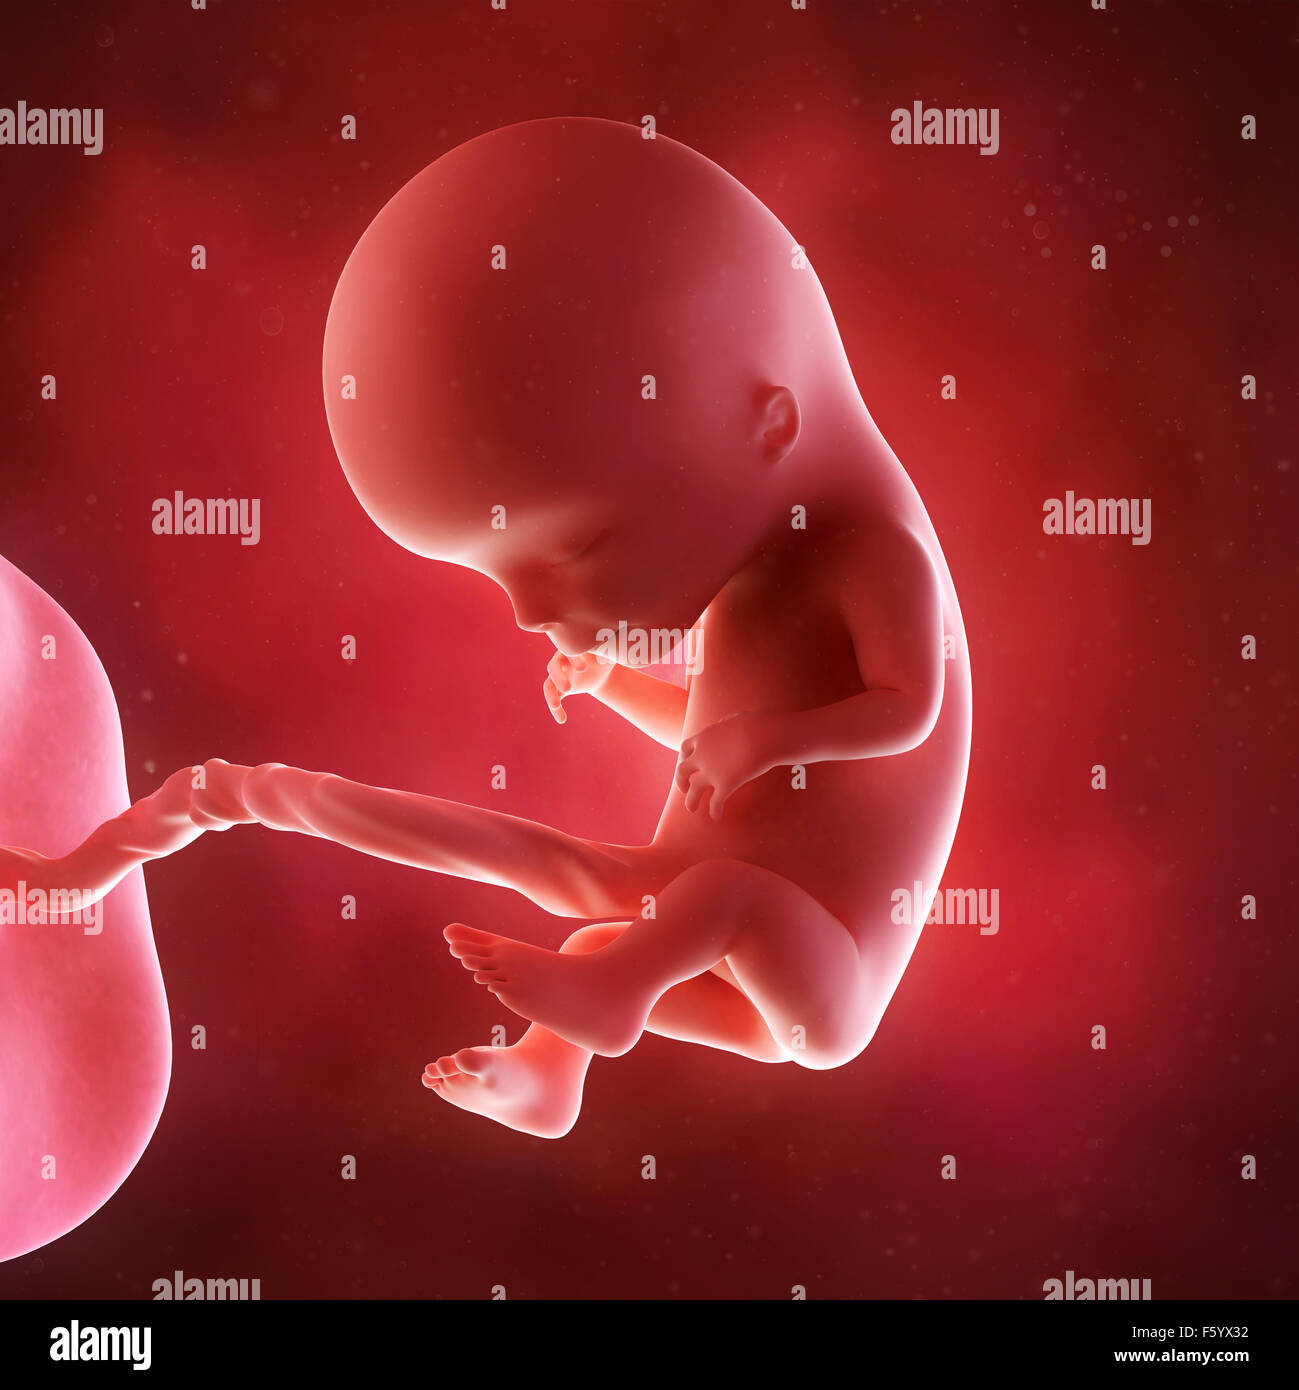 medical accurate 3d illustration of a fetus week 12 Stock Photo